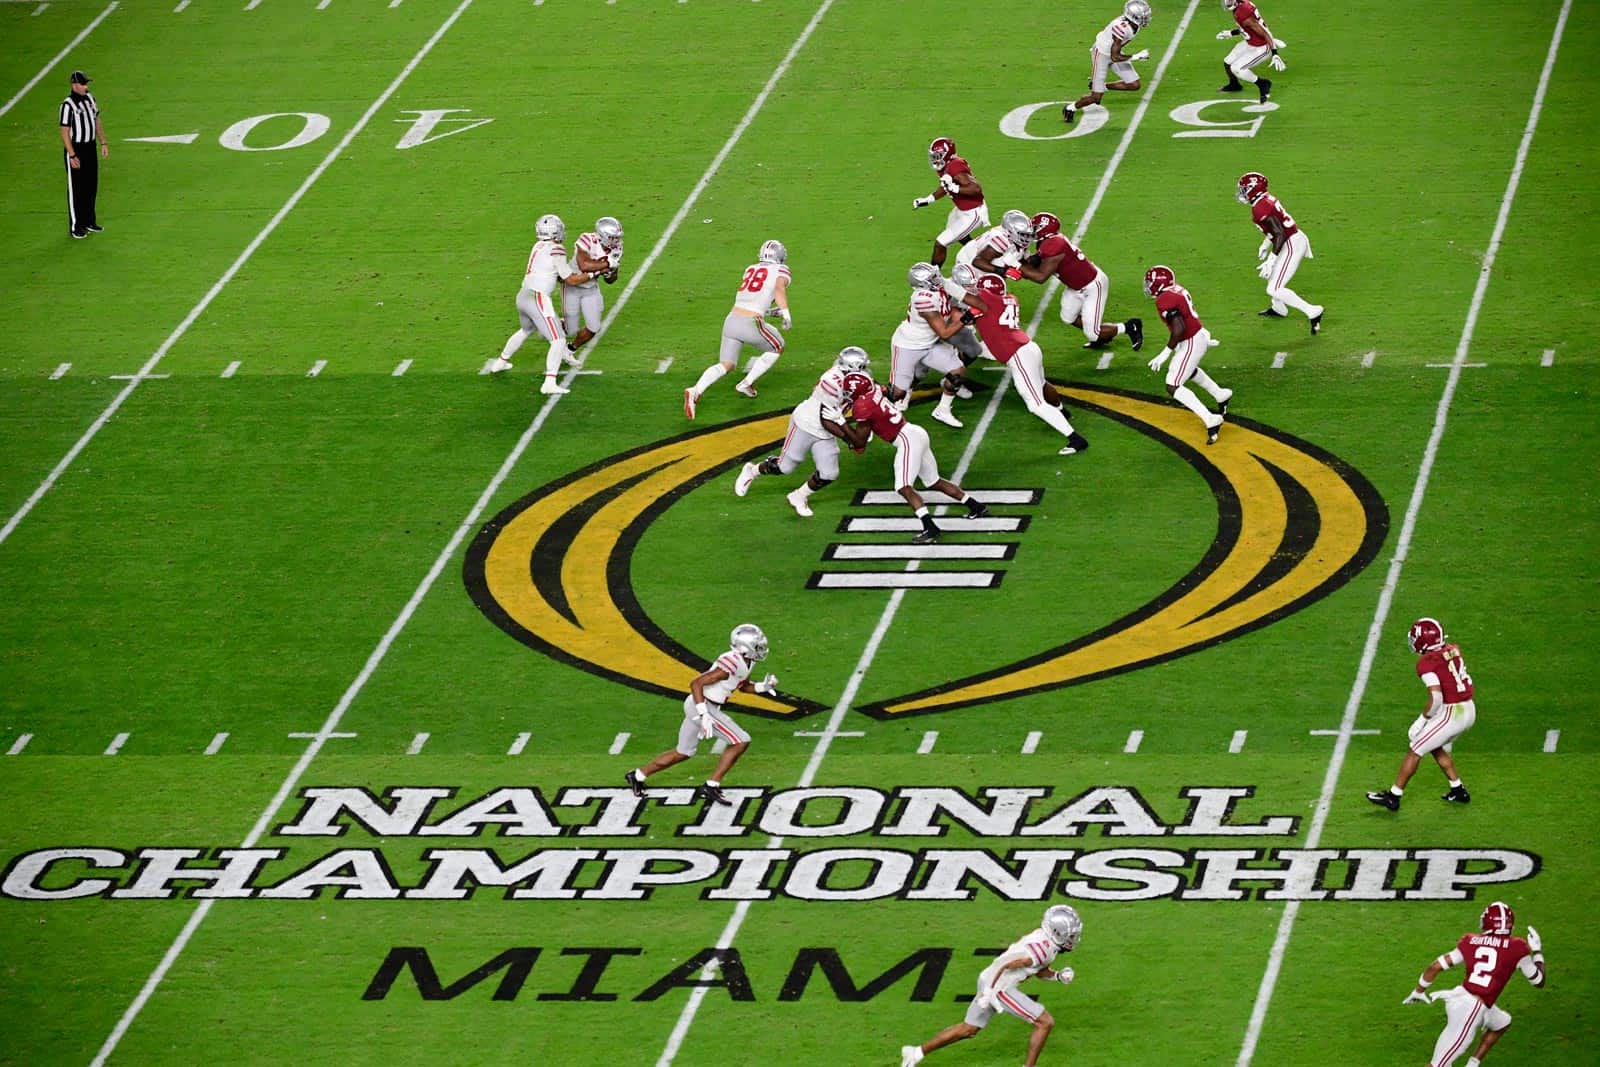 College Football Playoff National Championship